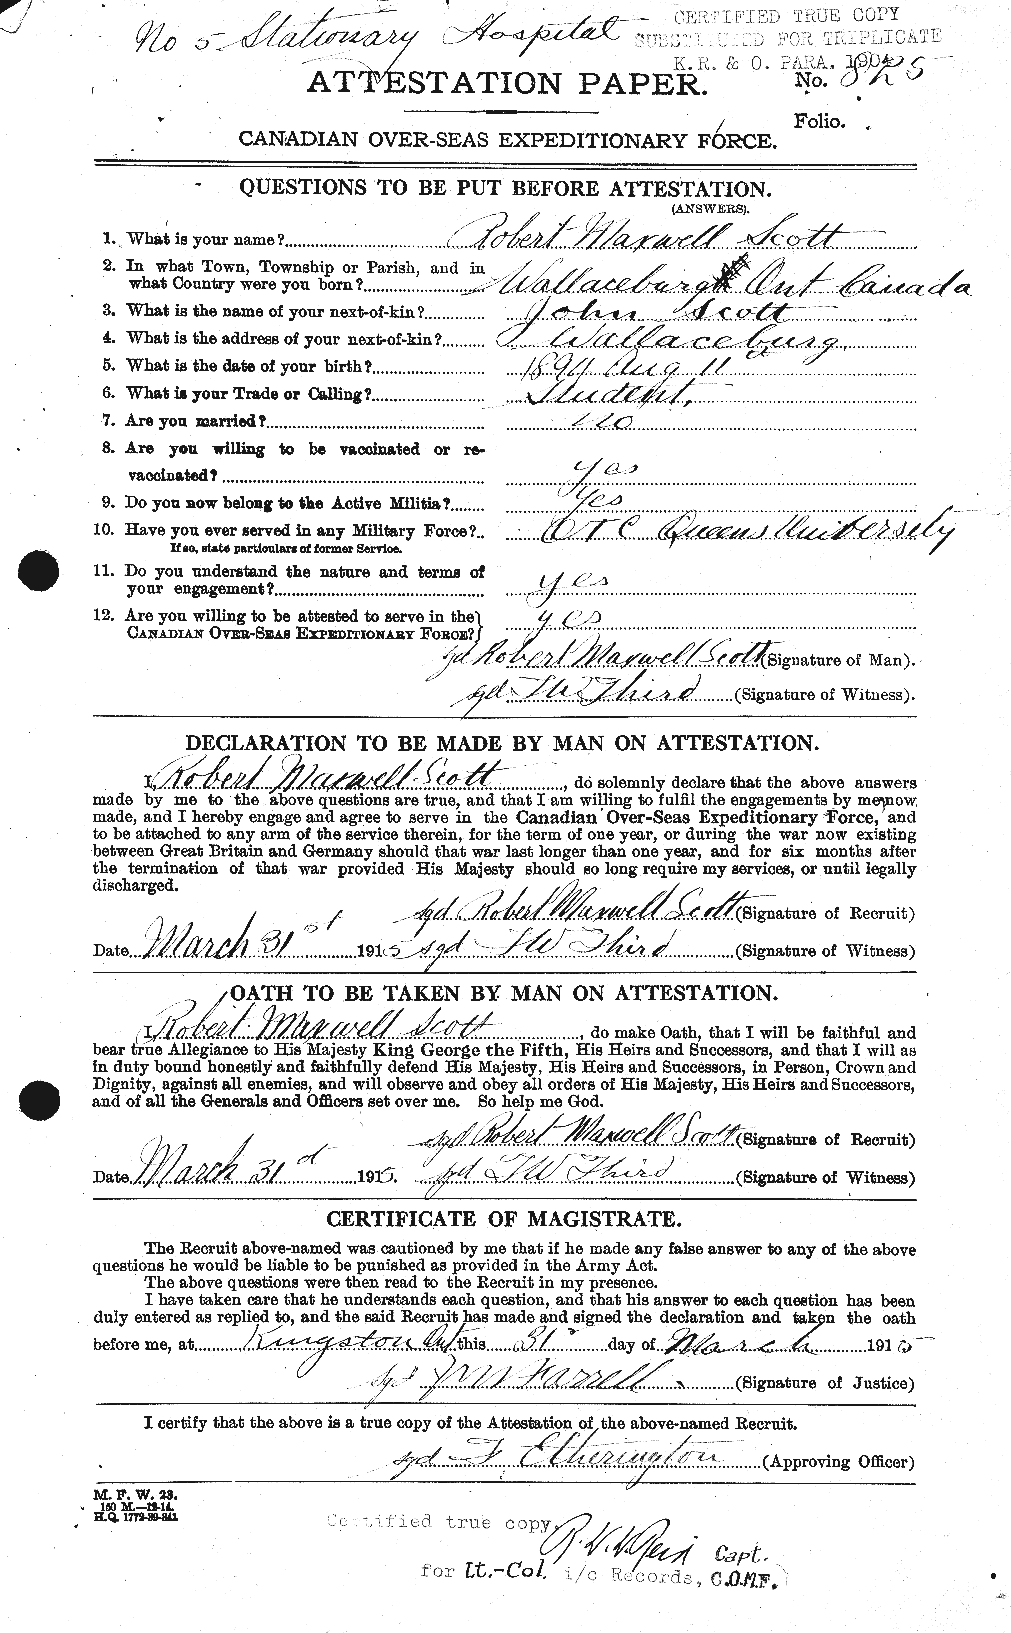 Personnel Records of the First World War - CEF 089123a